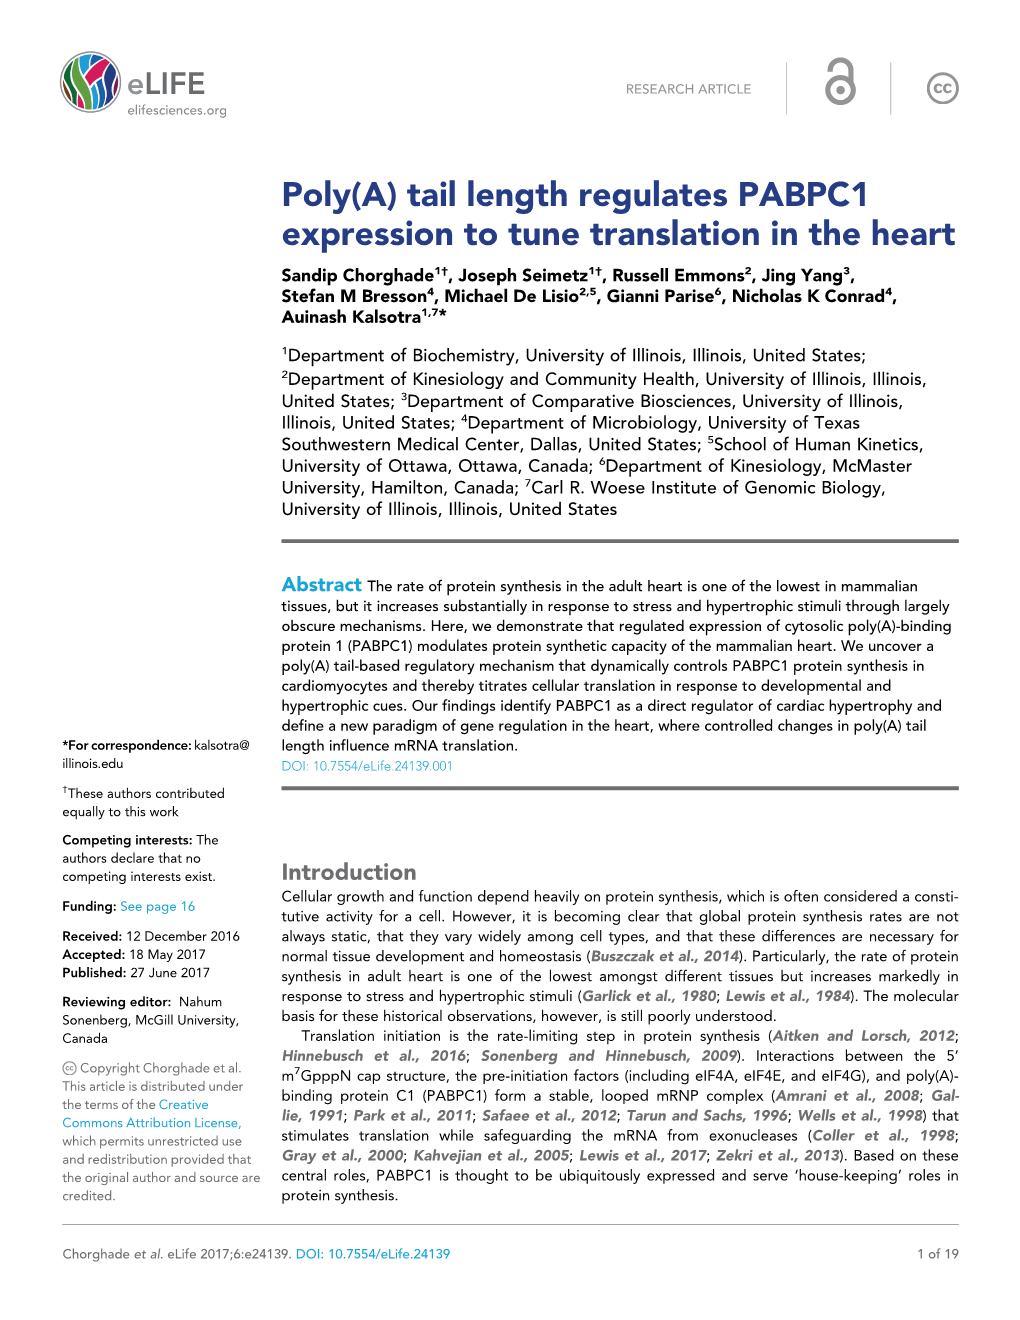 Poly(A) Tail Length Regulates PABPC1 Expression to Tune Translation in The